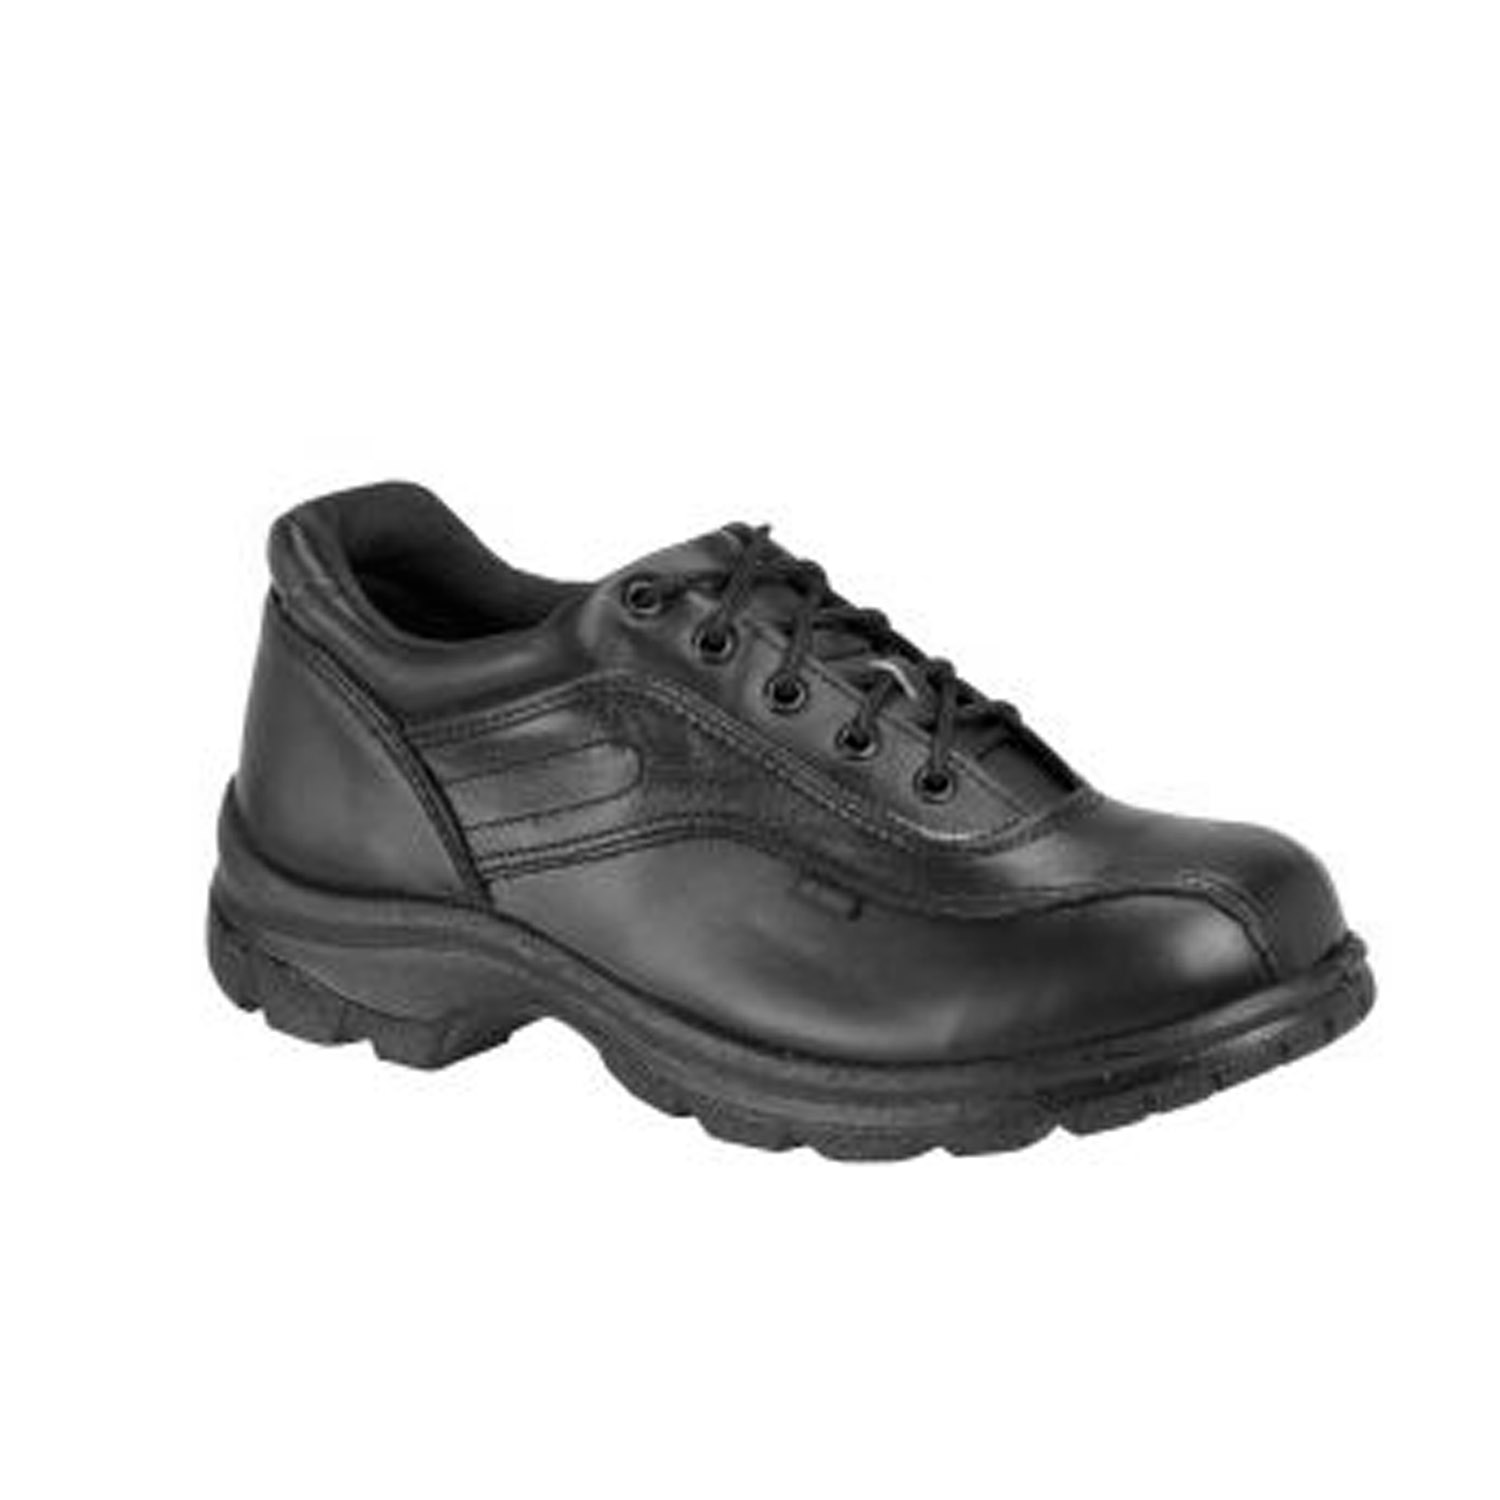 SHOE OXFORD DOUBLE TRACK